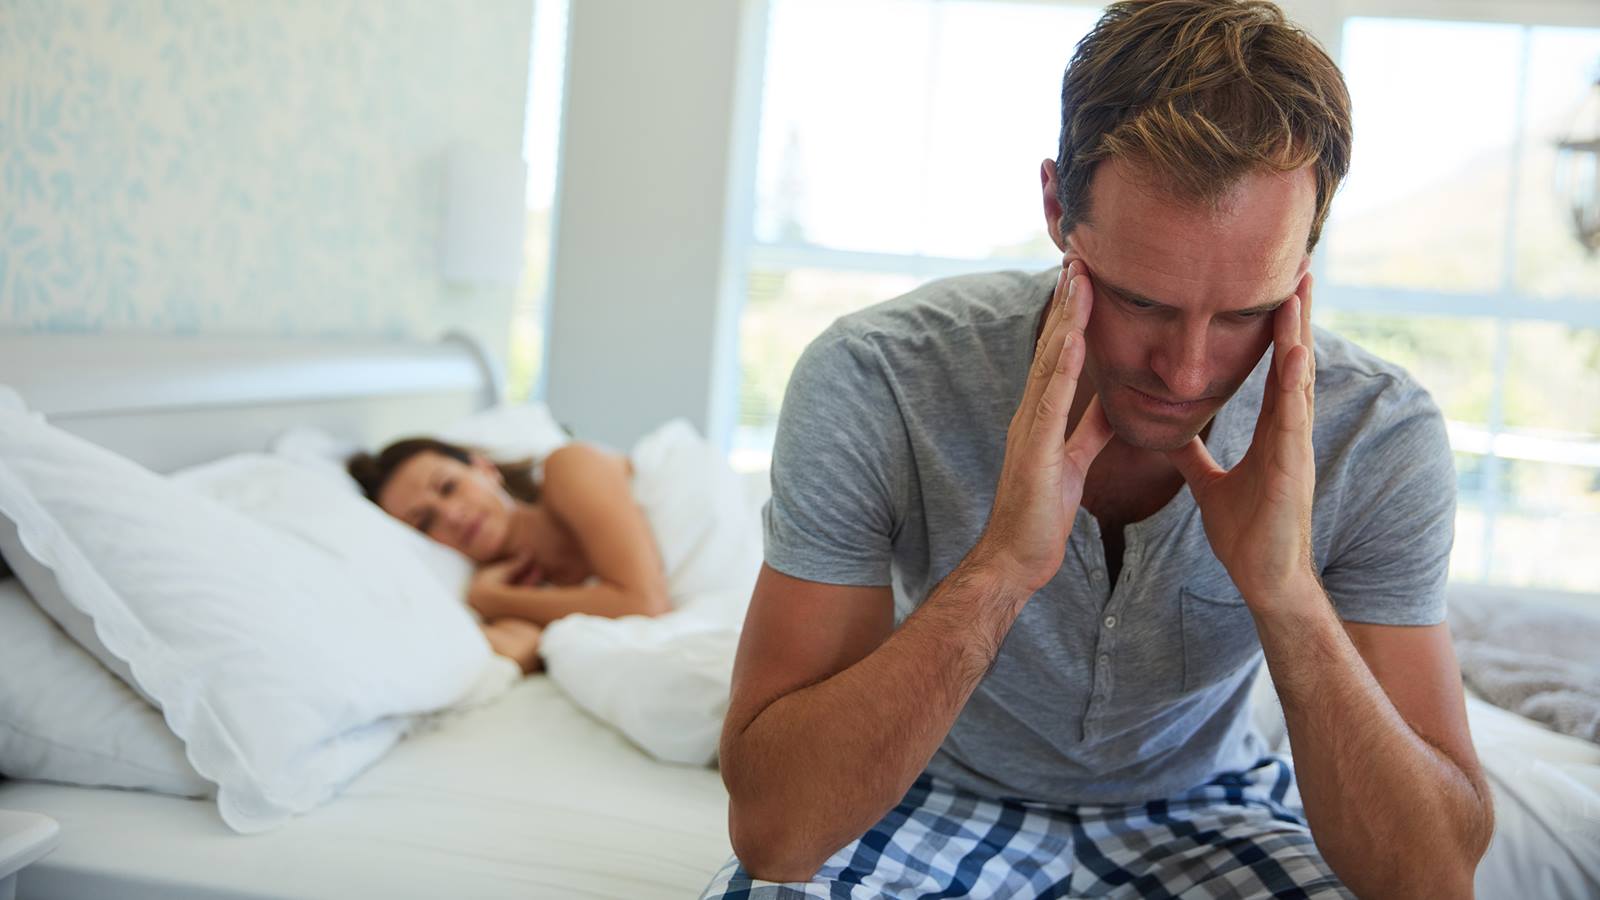 Erectile Dysfunction Can Be Treated With A Variety Of Therapies